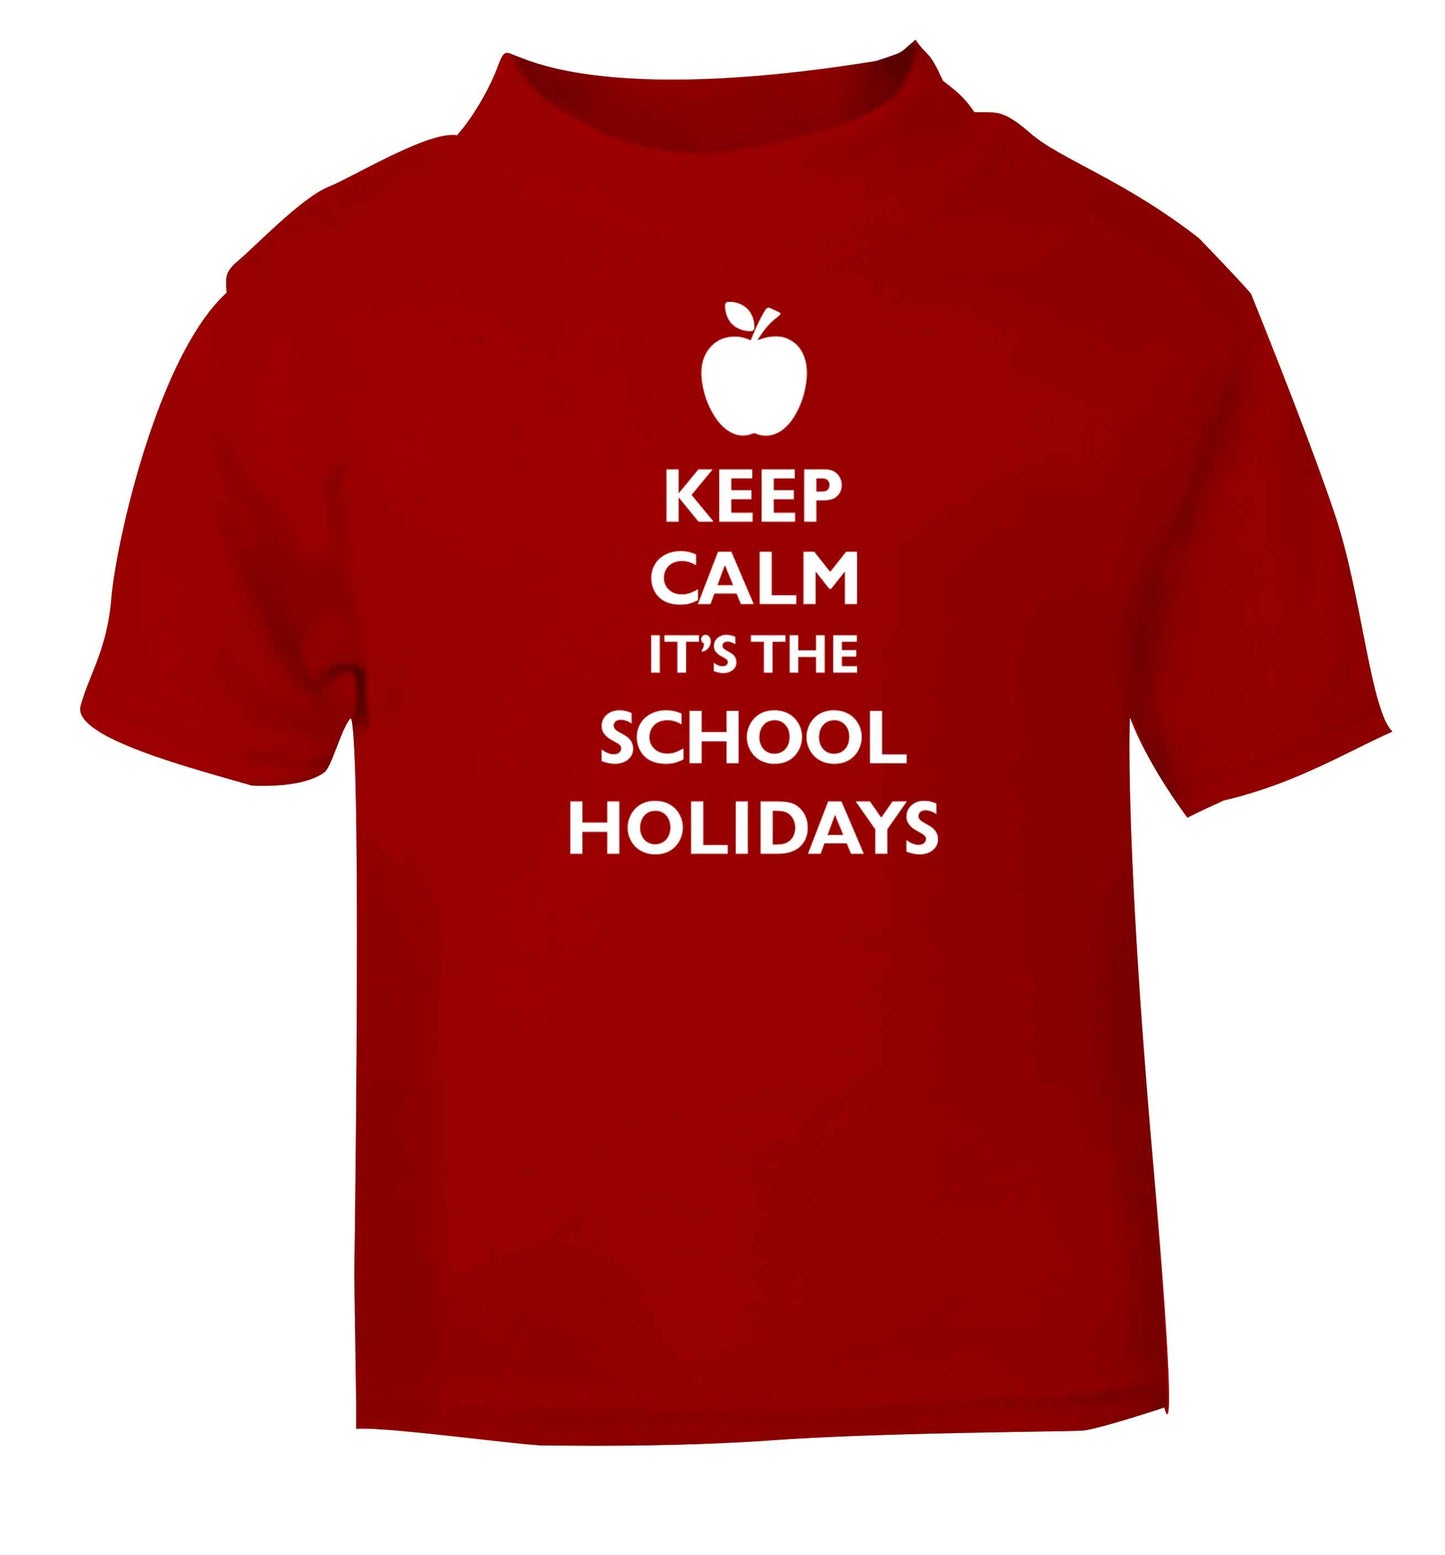 Keep calm it's the school holidays red baby toddler Tshirt 2 Years